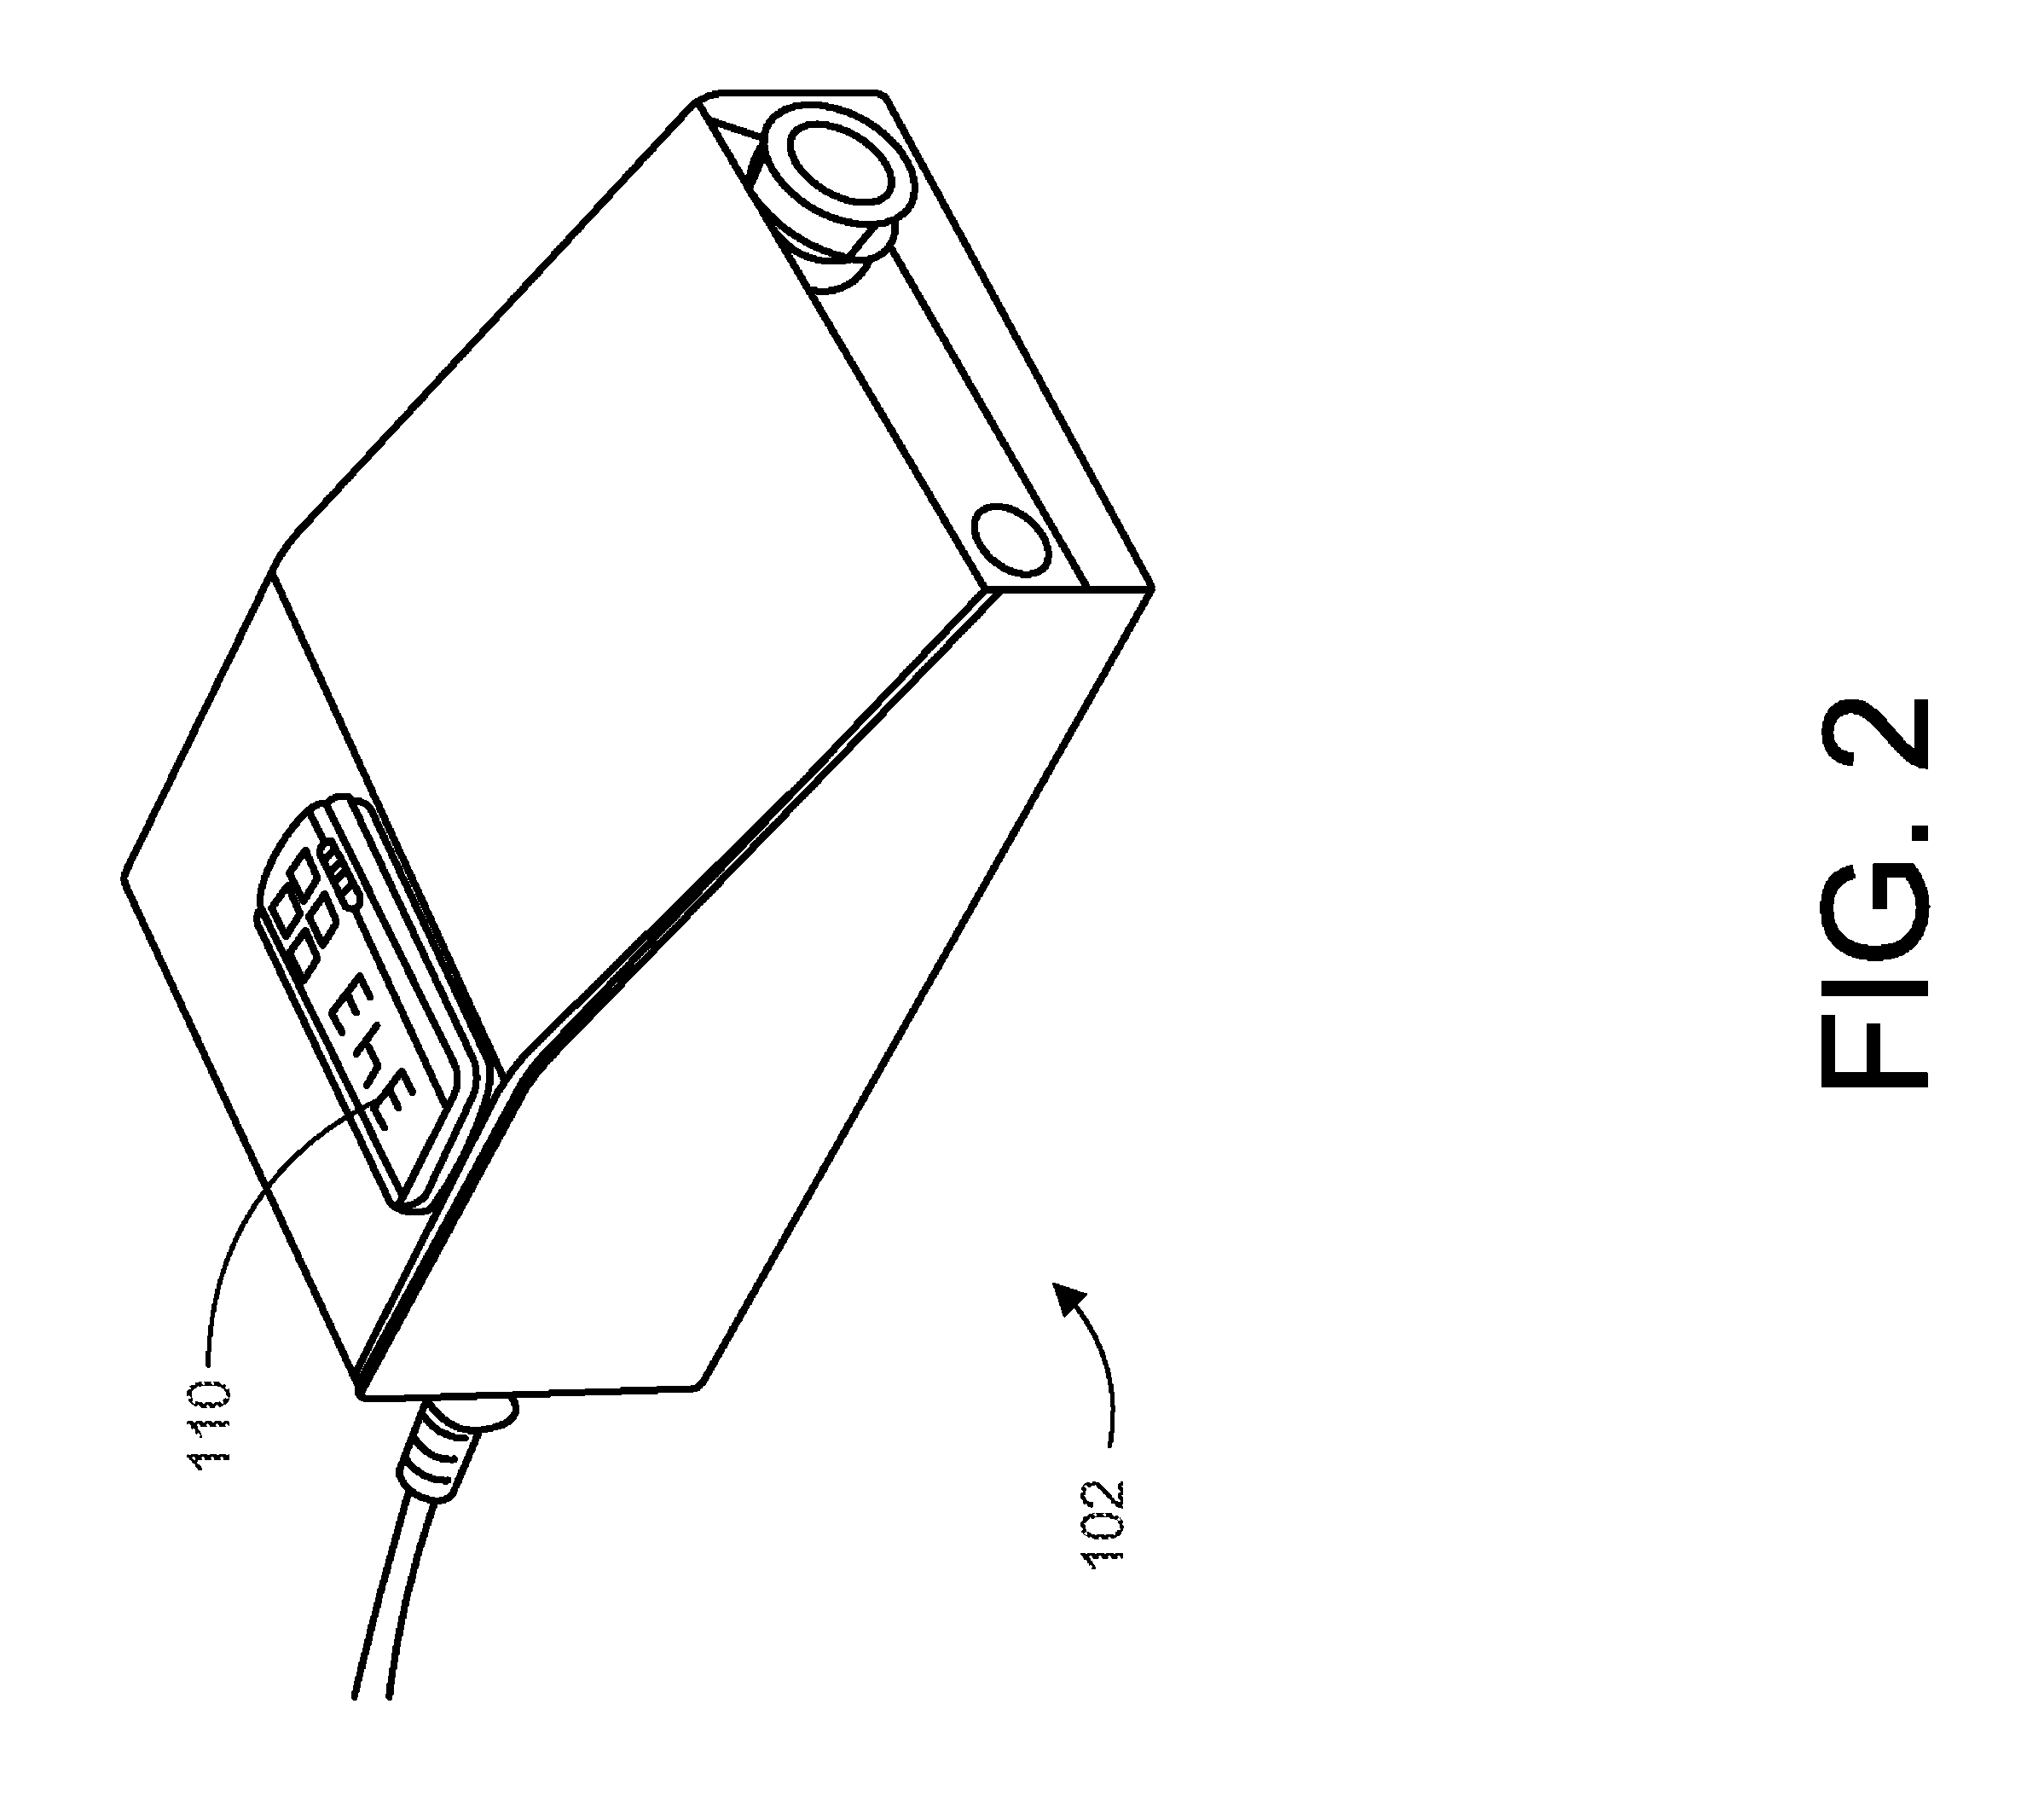 Vaporizer heating assembly and method of regulating a temperature within the vaporizer heating assembly